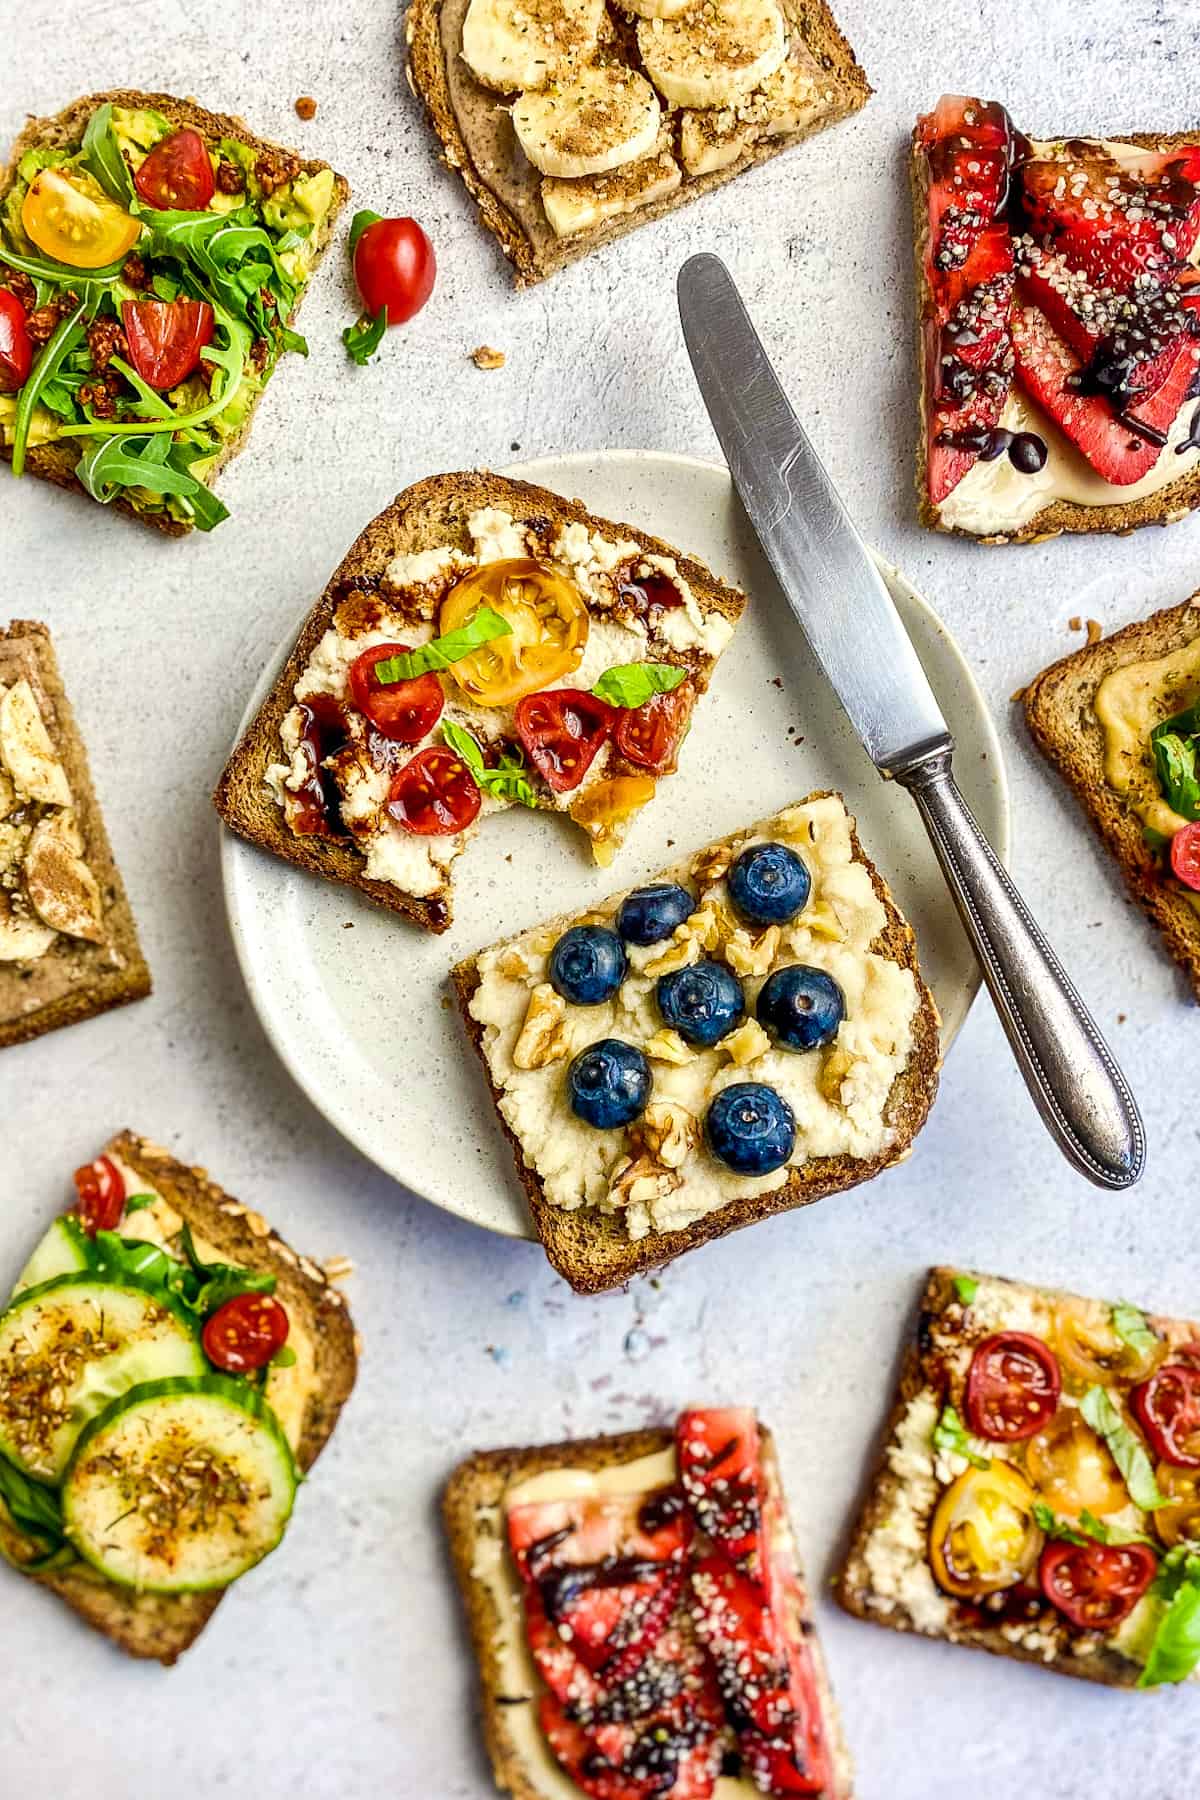 Multiple toast topping ideas with 2 on plate next to a knife.